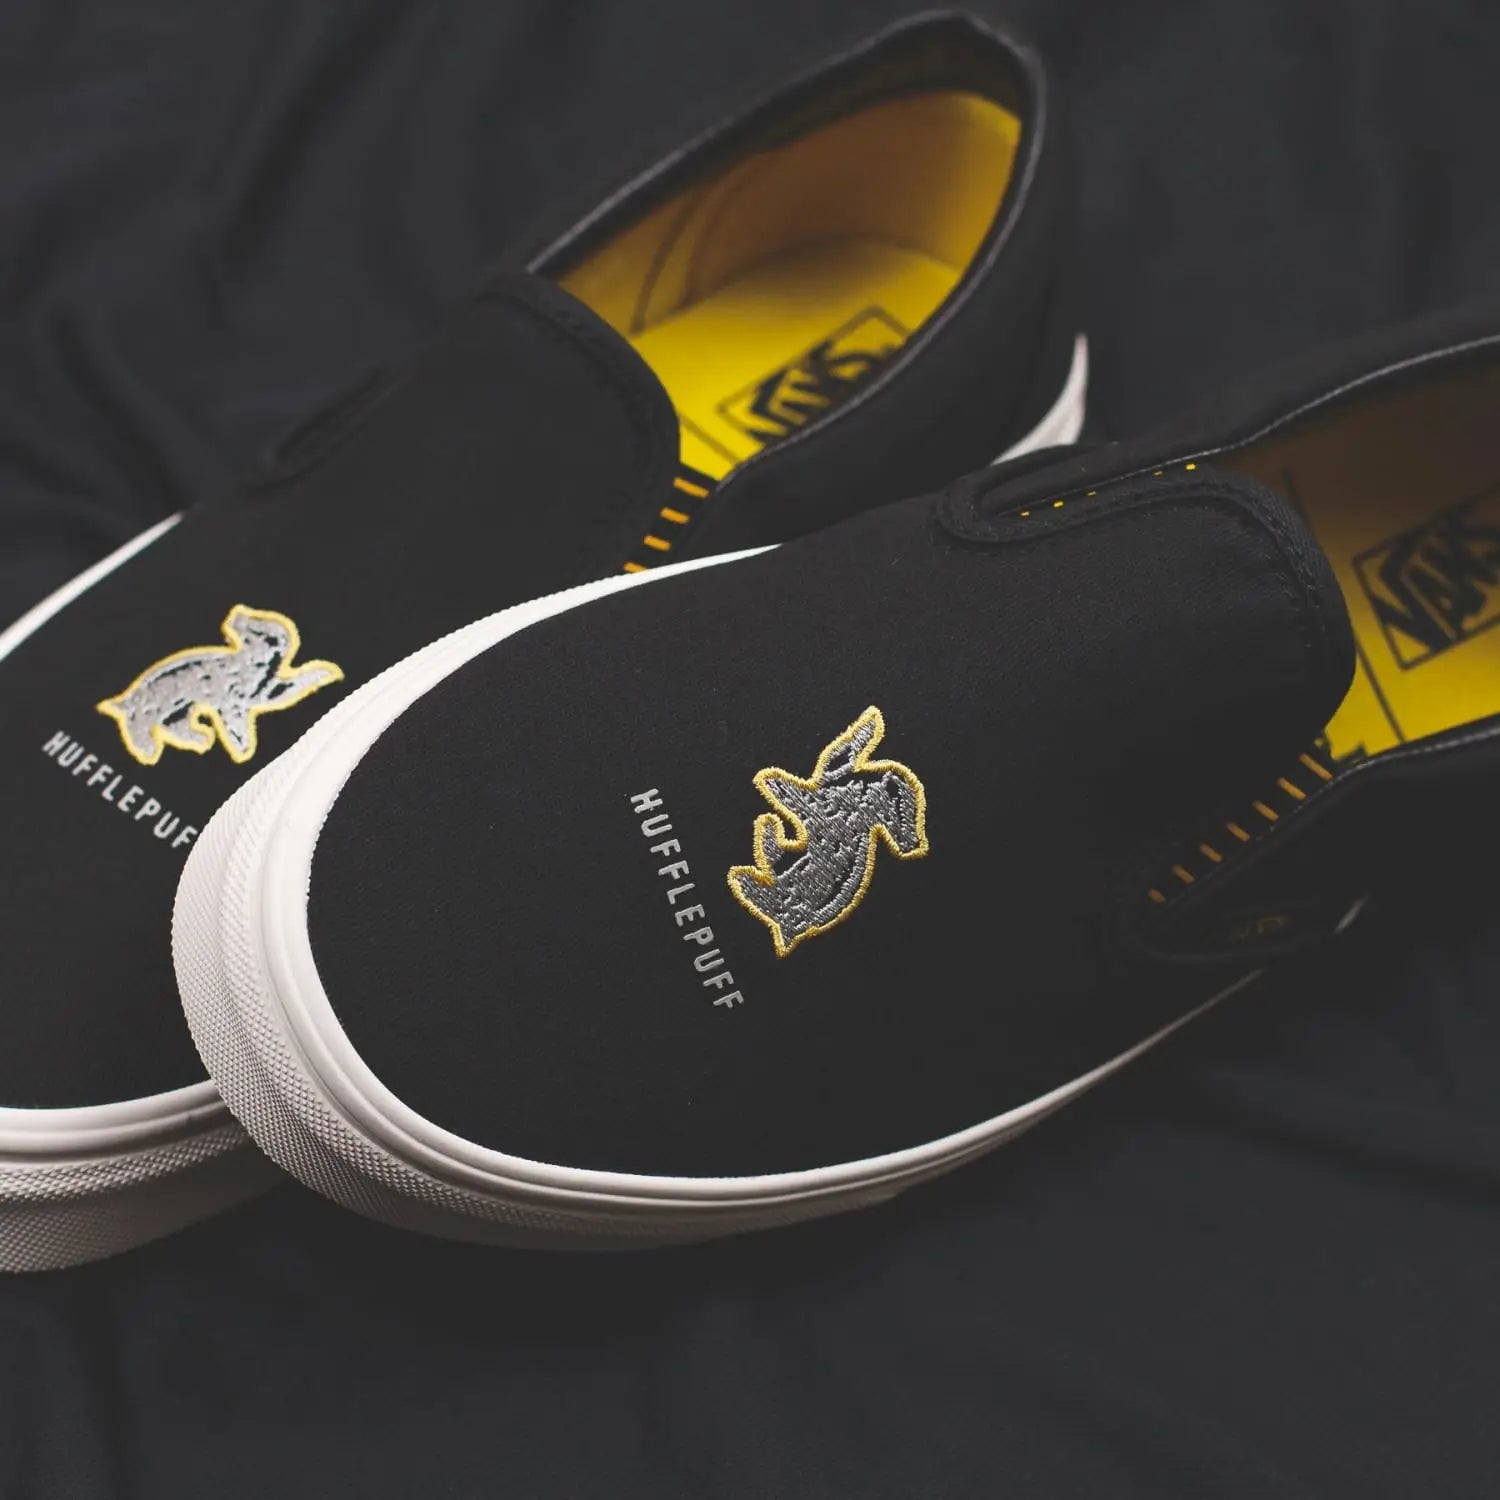 Vans x Harry Potter - Footwear and Apparel Collection